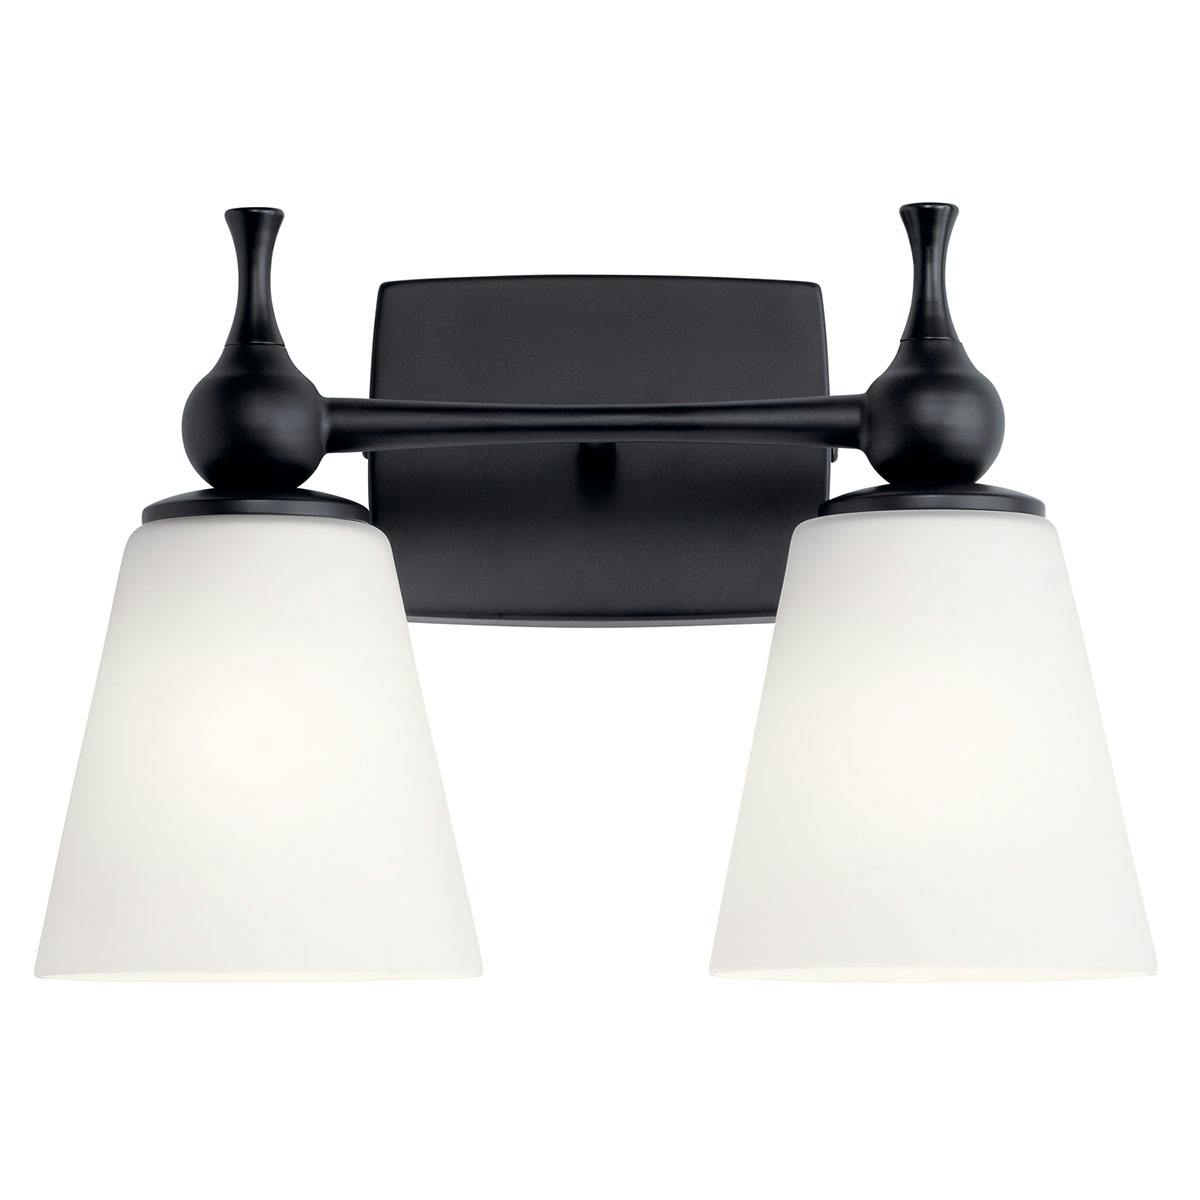 Front view of the Cosabella 15" Vanity Light Black on a white background